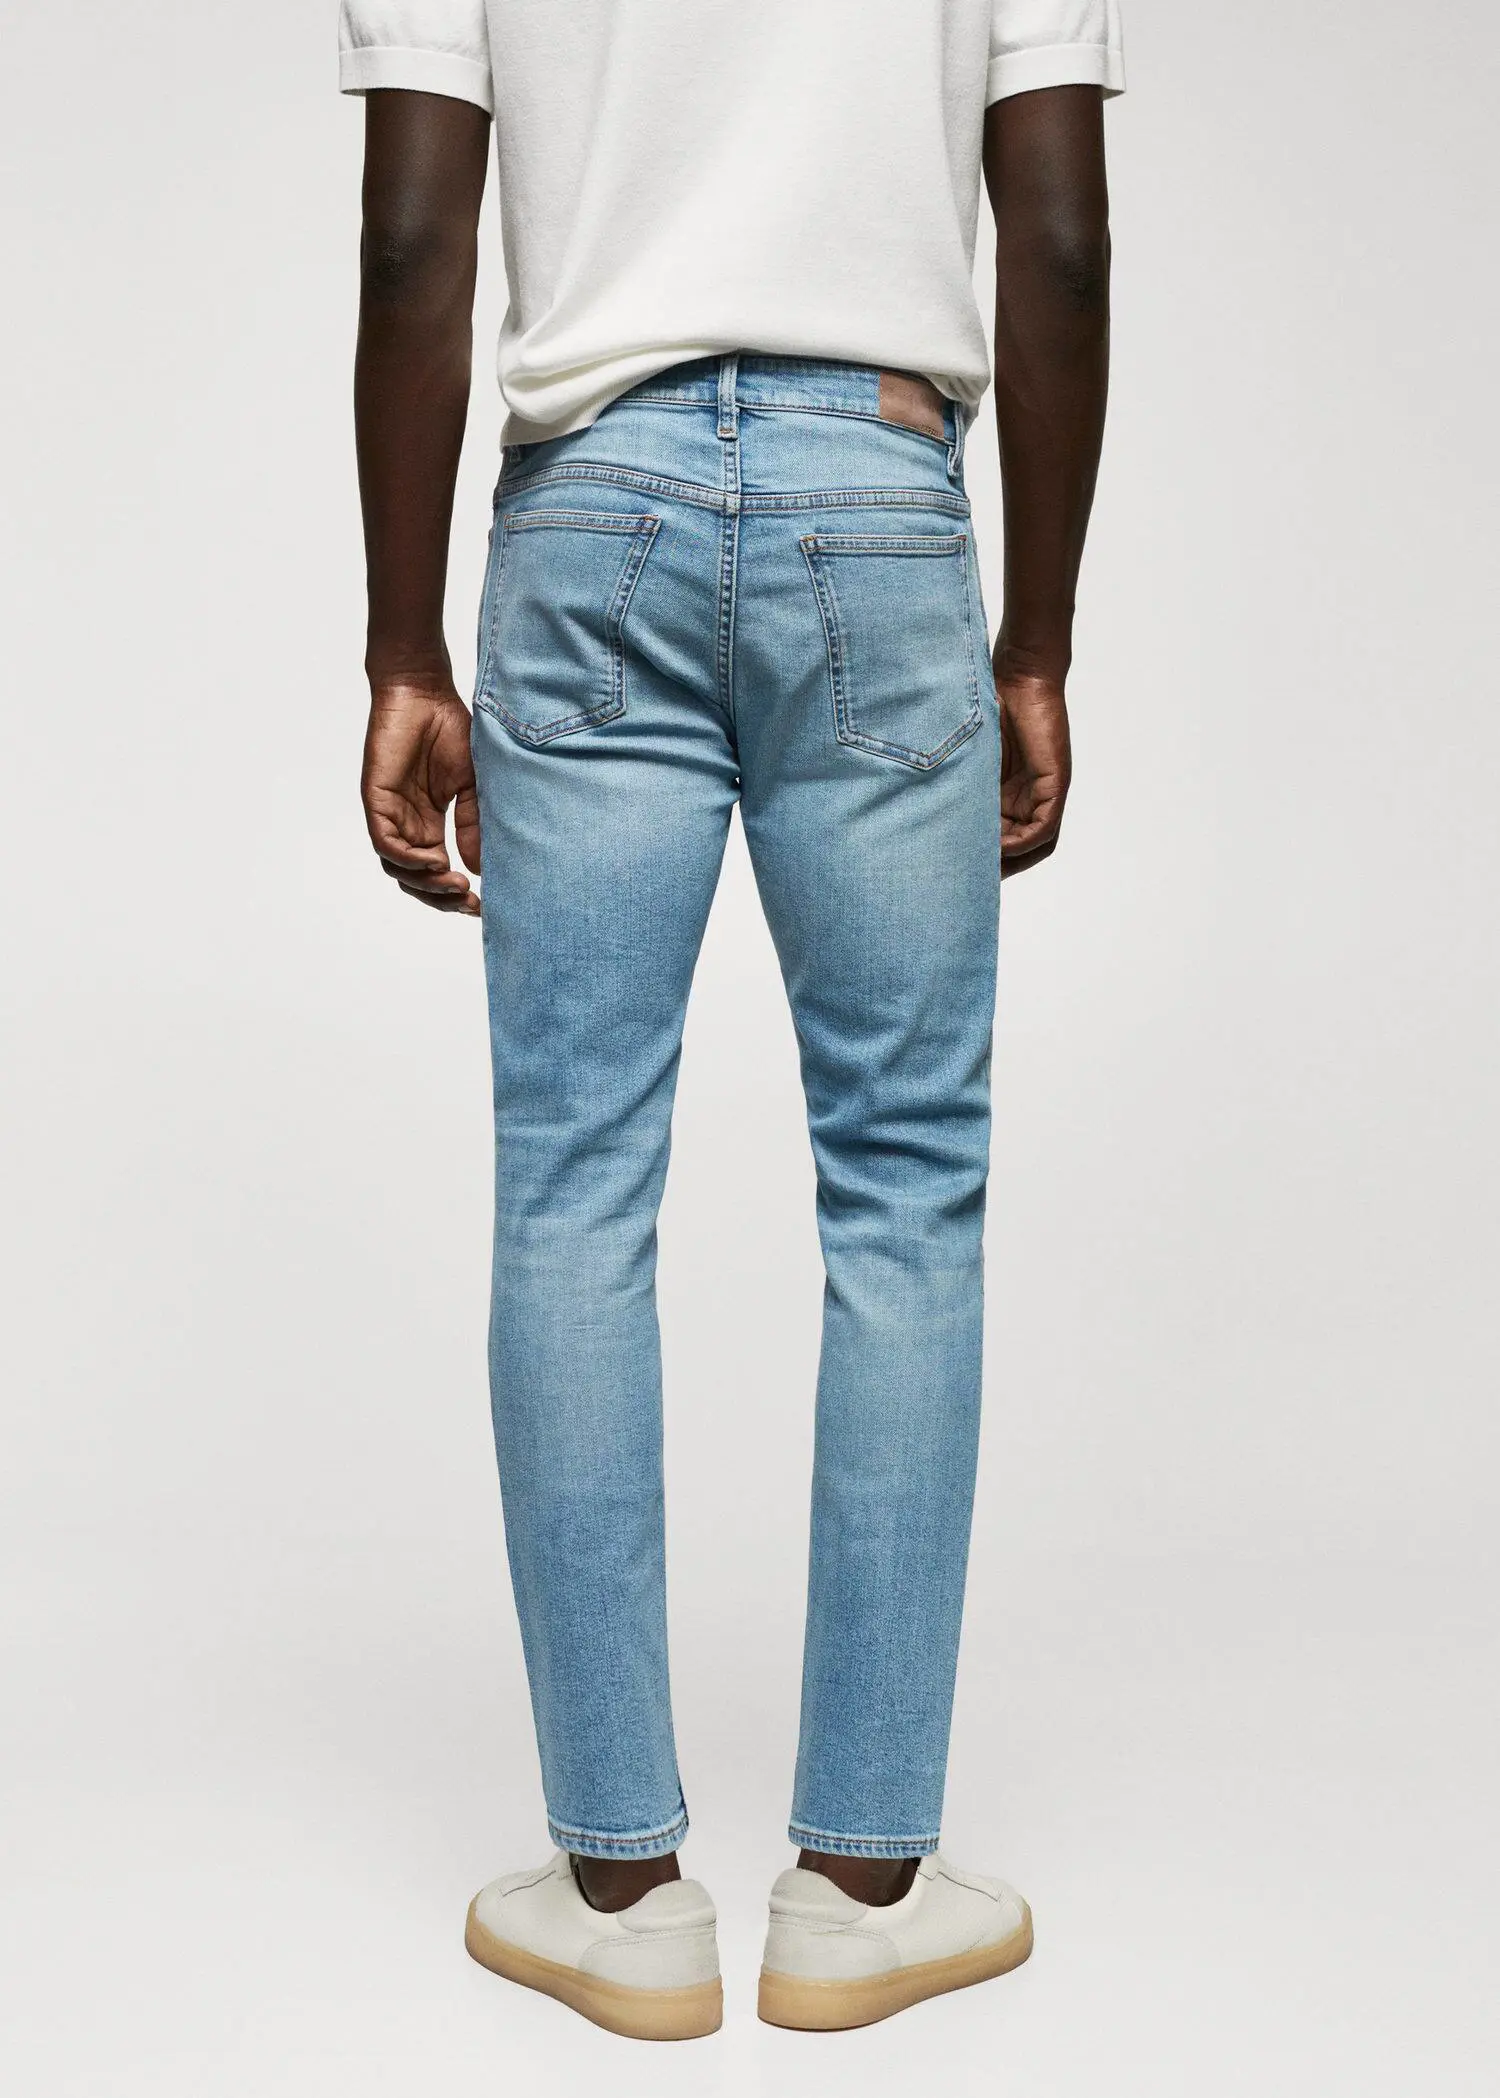 Mango Tom tapered cropped jean. 3